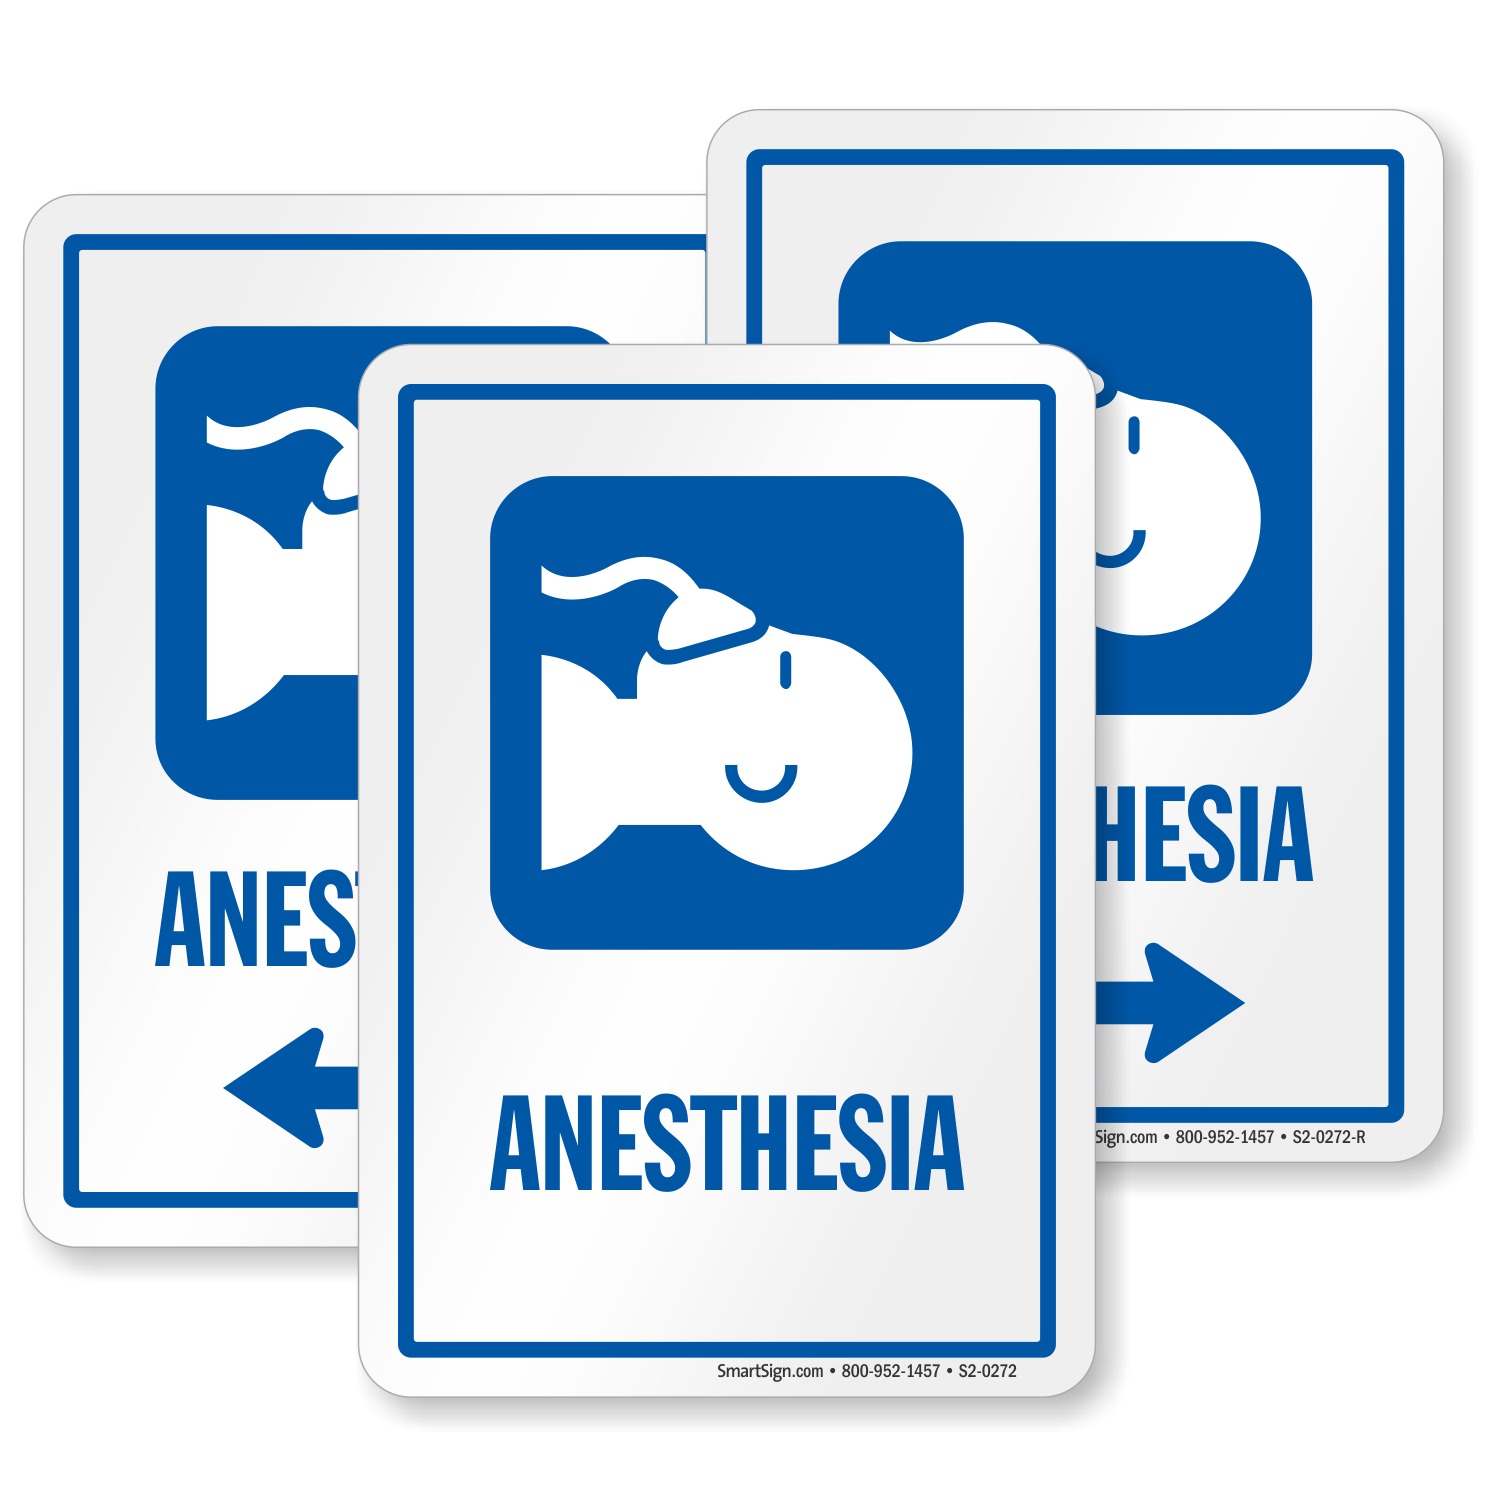 anesthesia-patient-receiving-anaesthetic-sign-s2-0272.png